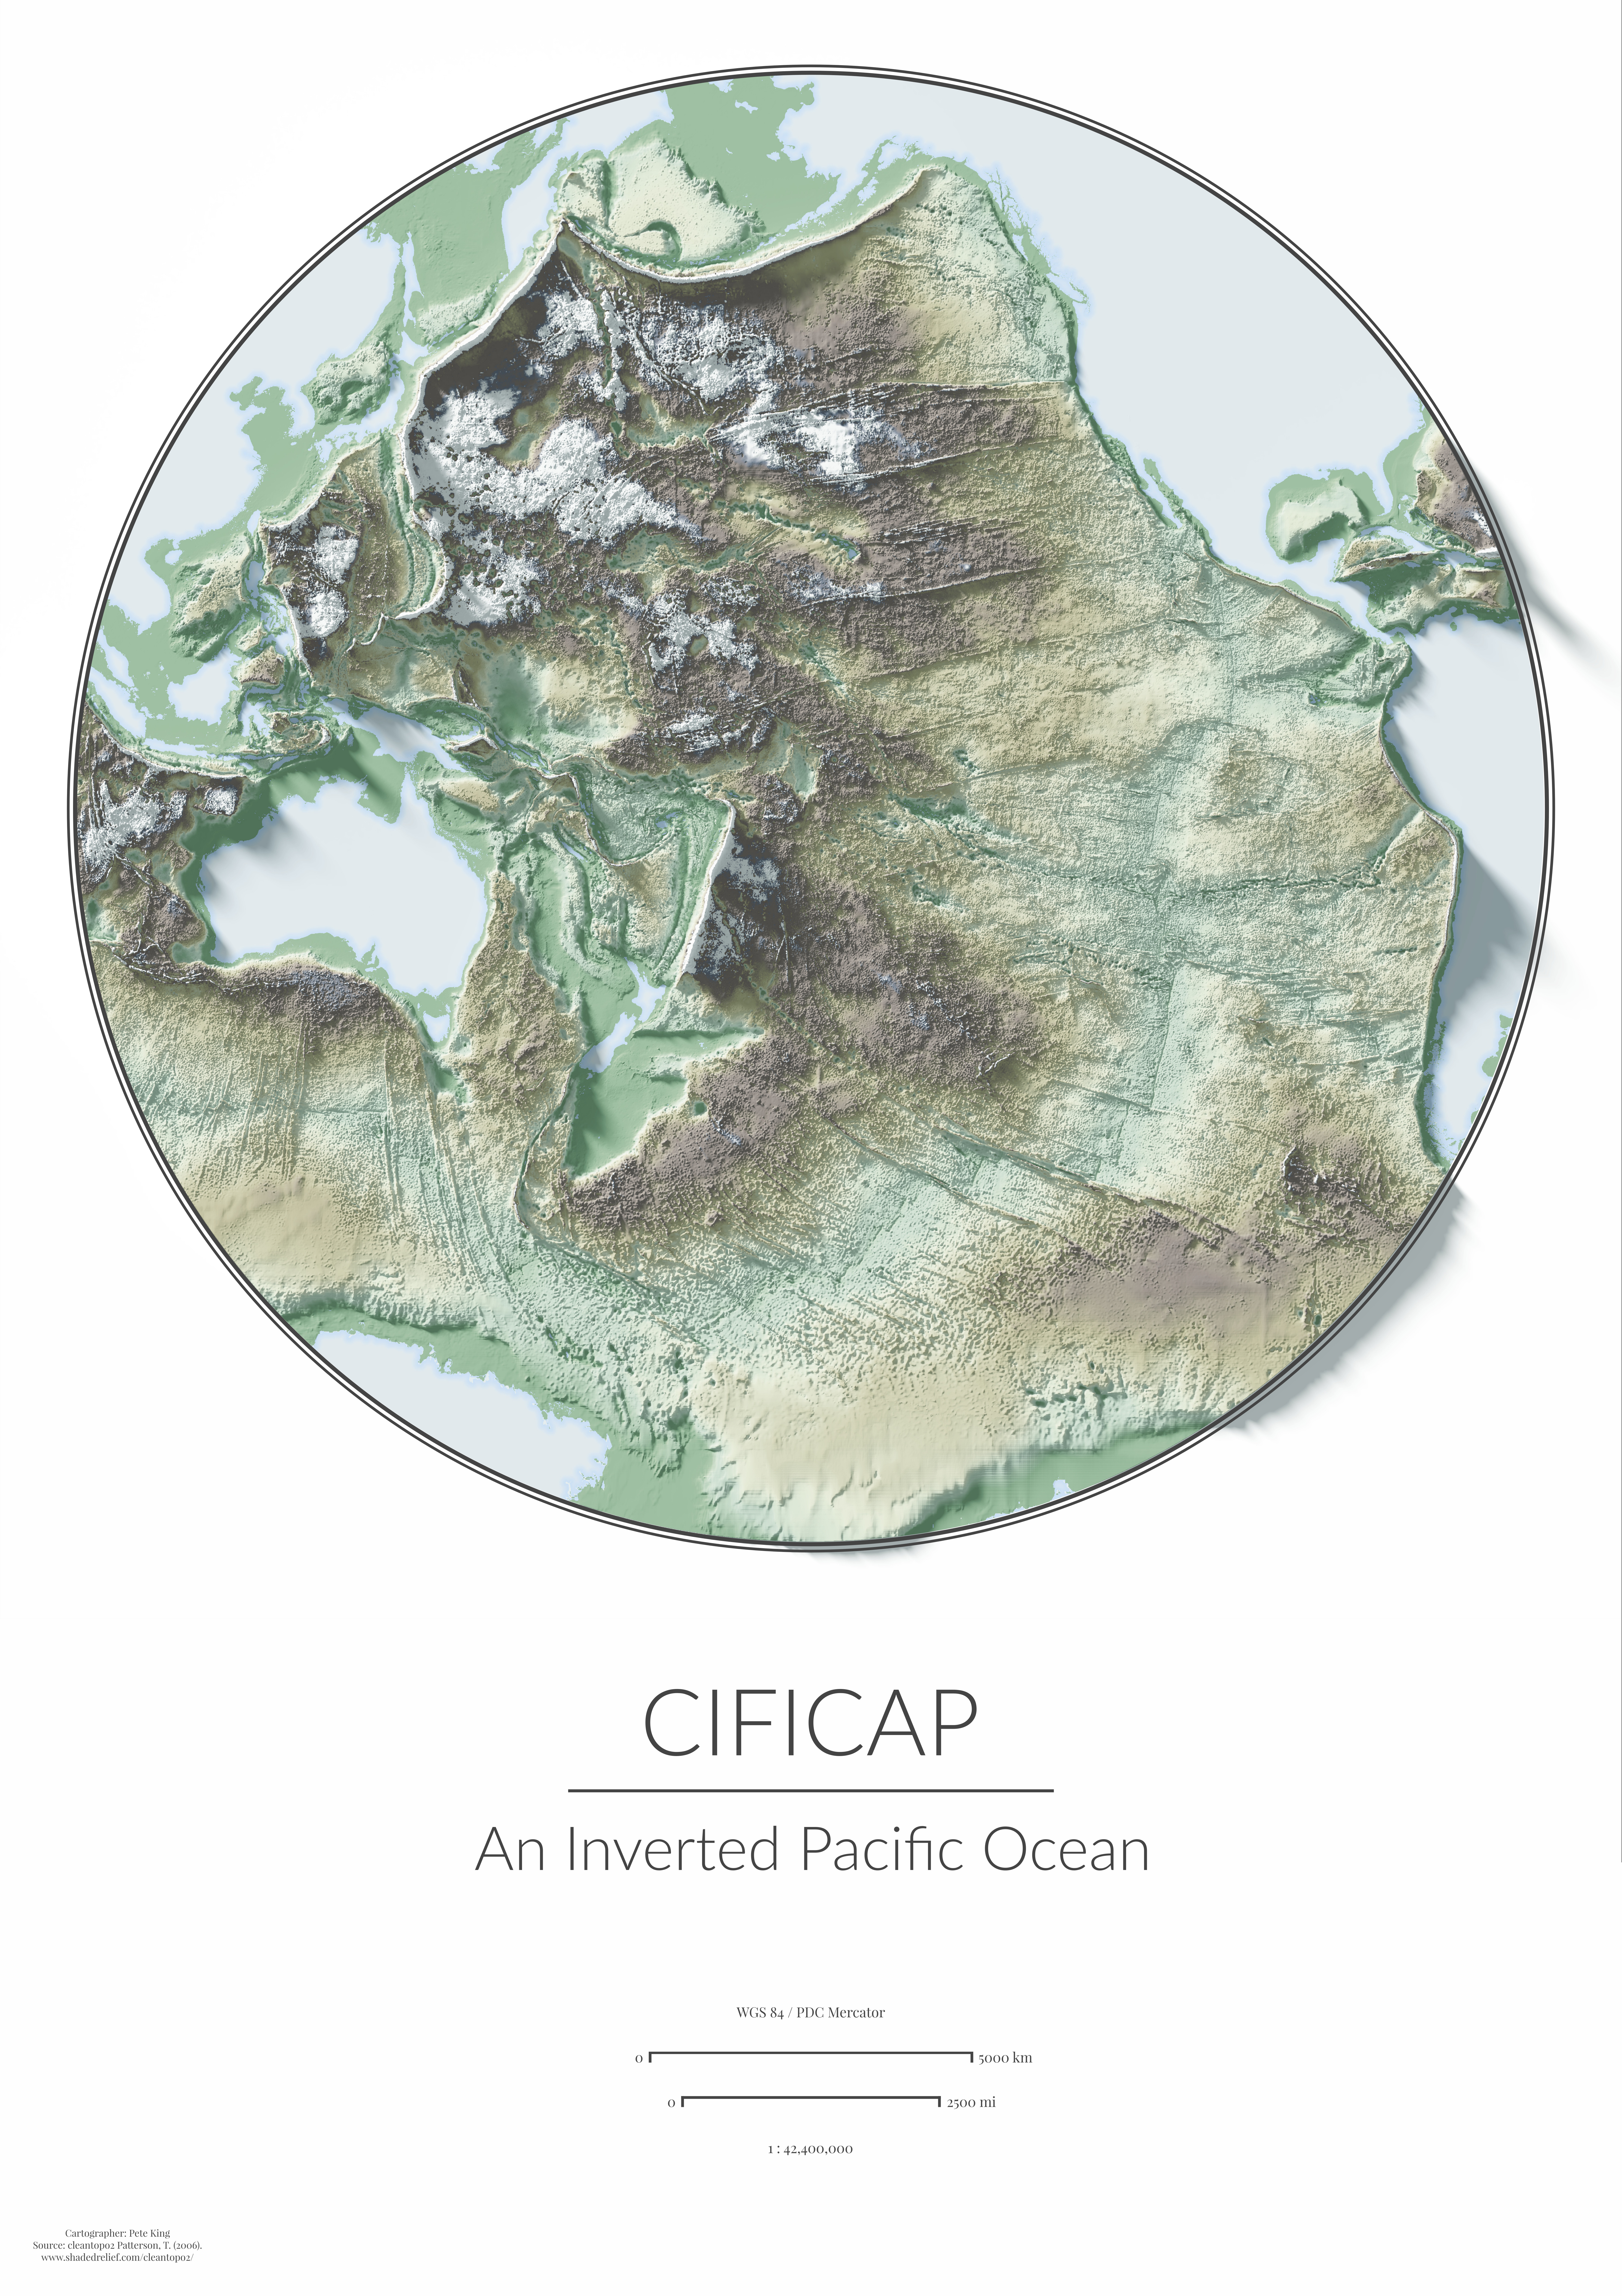 cificap - an inverted pacific